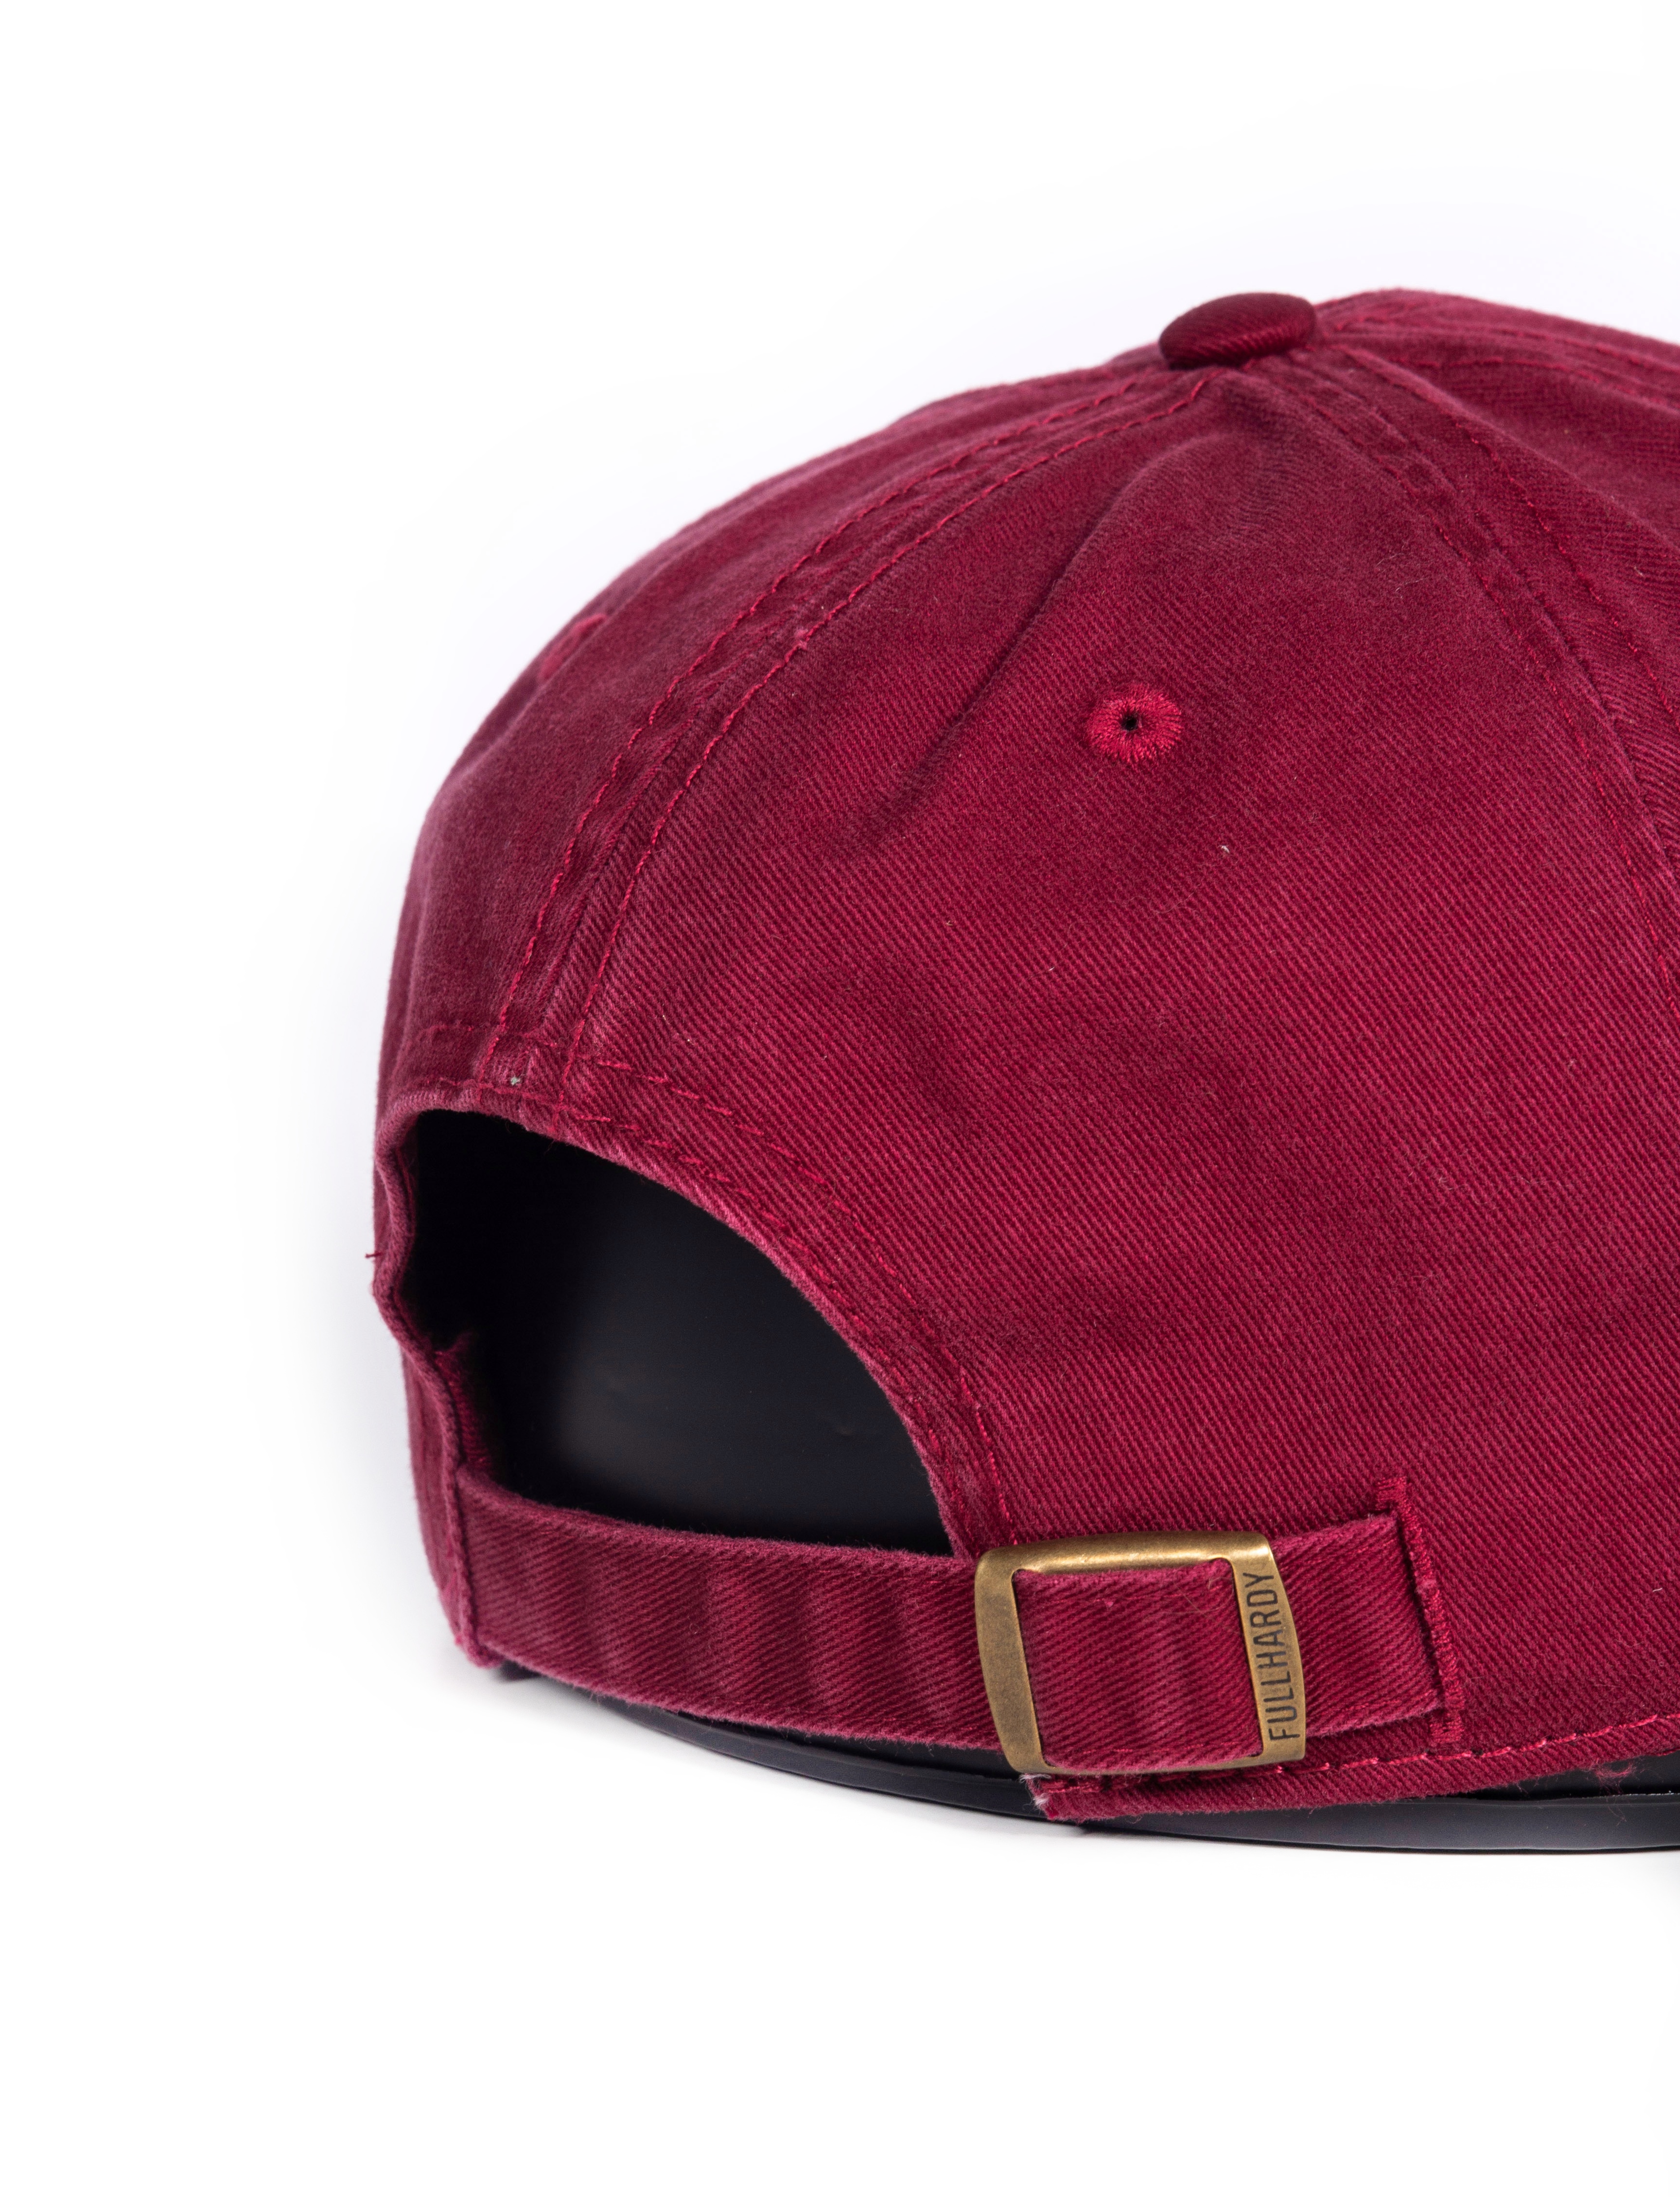 Topi T-FCTNMRN Maroon